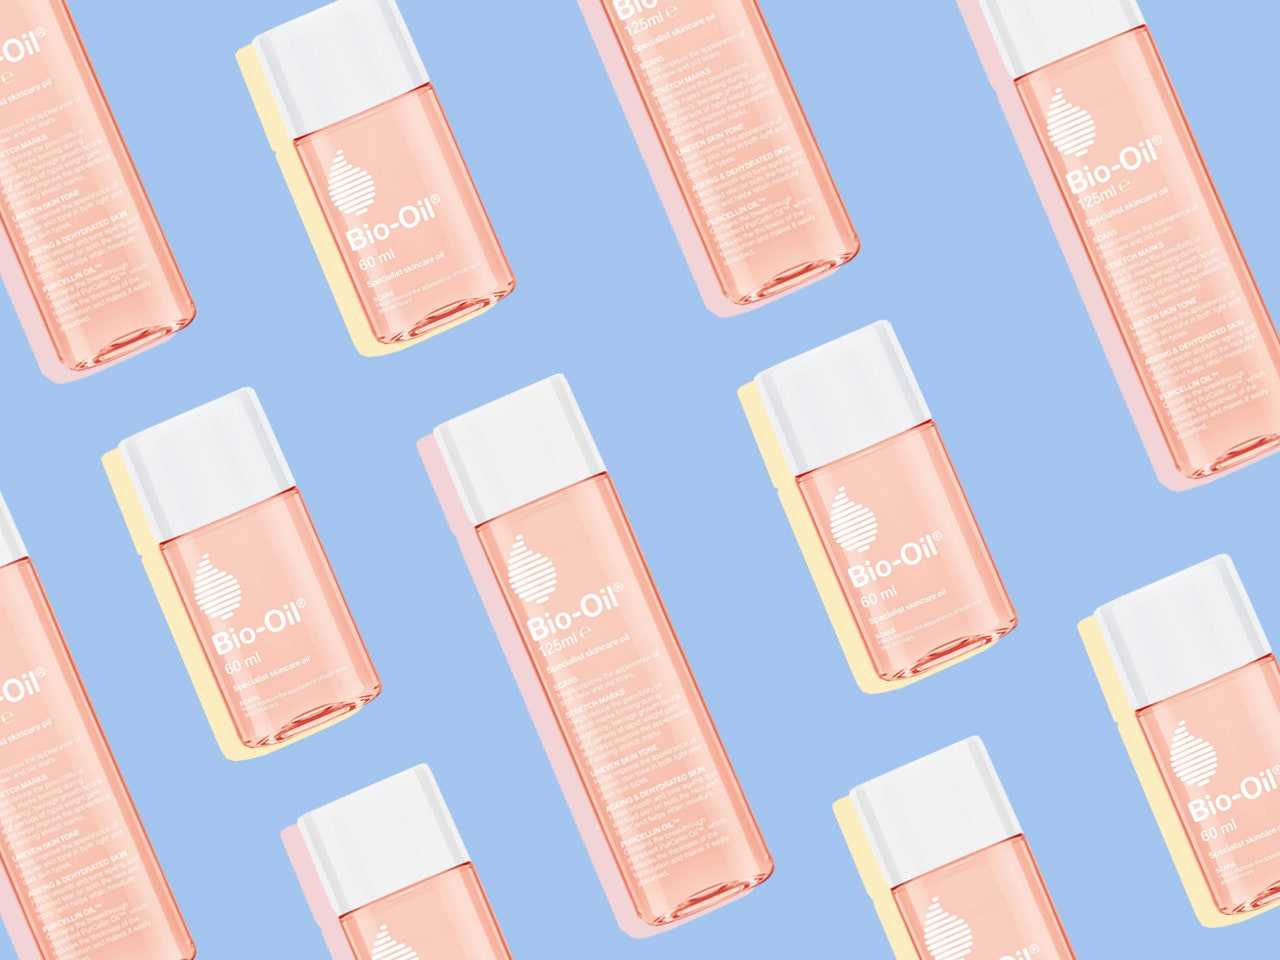 9 Ways to Use Bio-Oil, the Drugstore Scar Treatment People Love